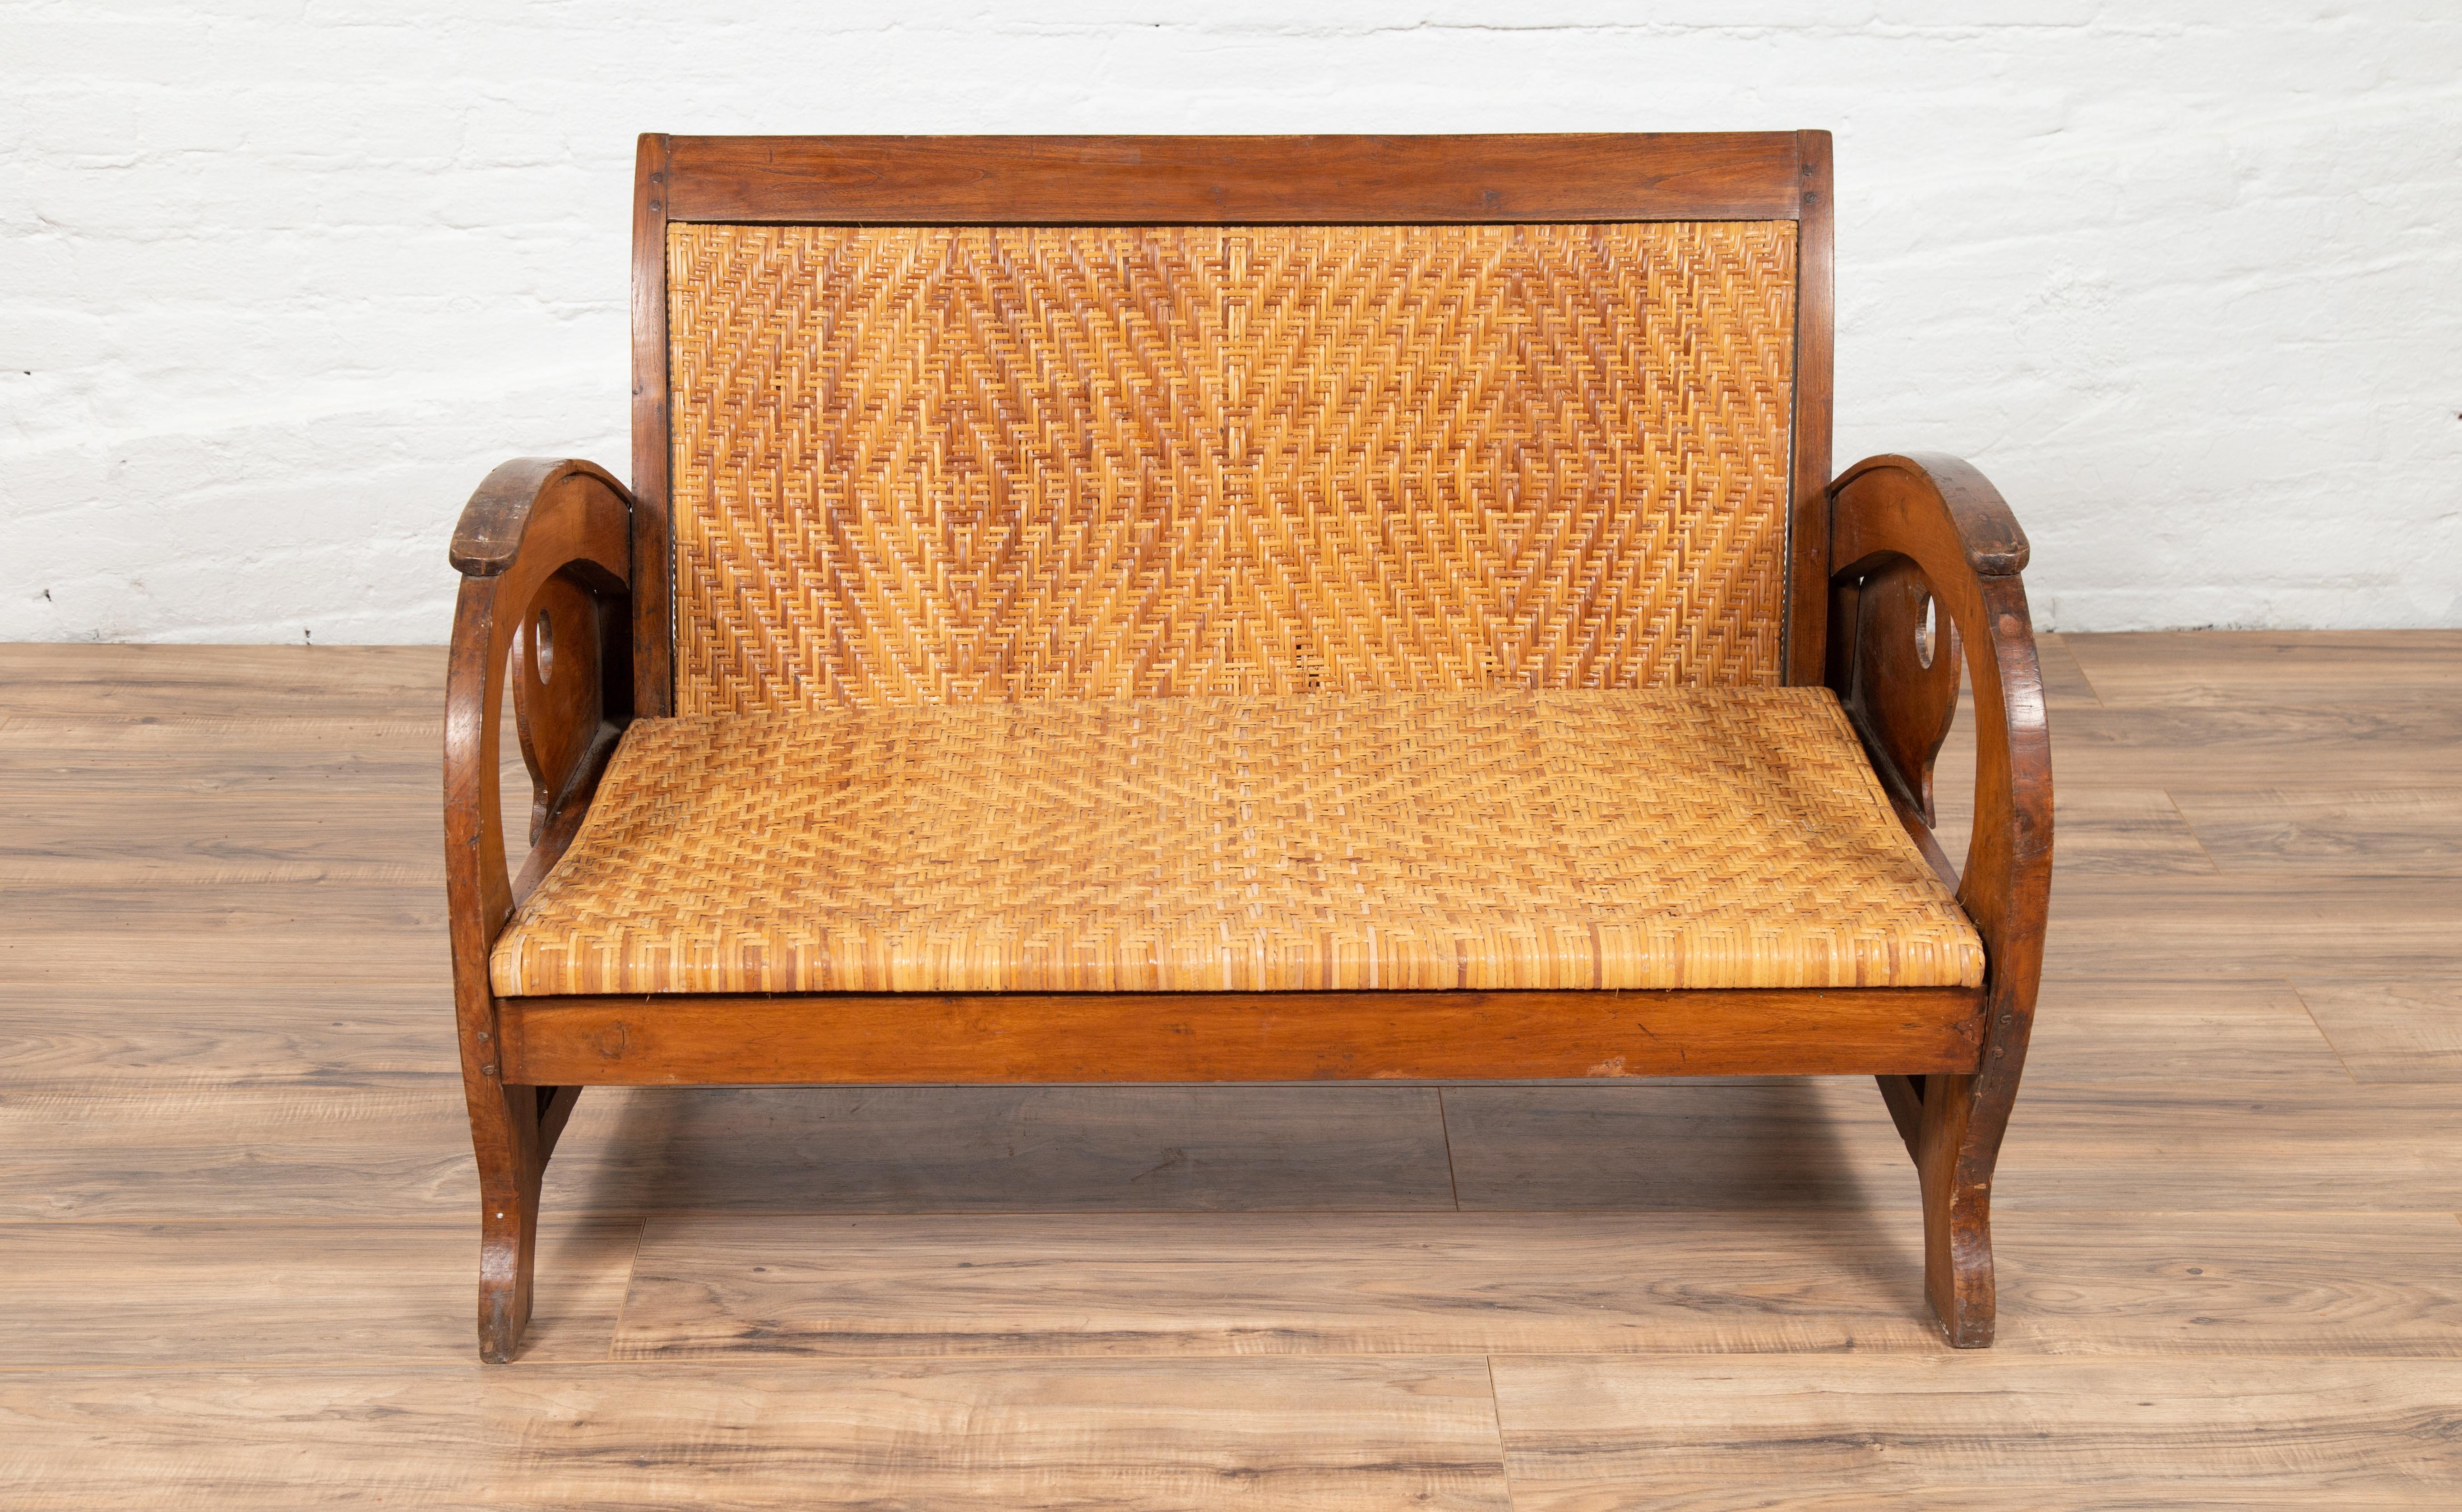 Indonesian Vintage Dutch Colonial Midcentury Teak Wood and Rattan Settee with Looping Arms